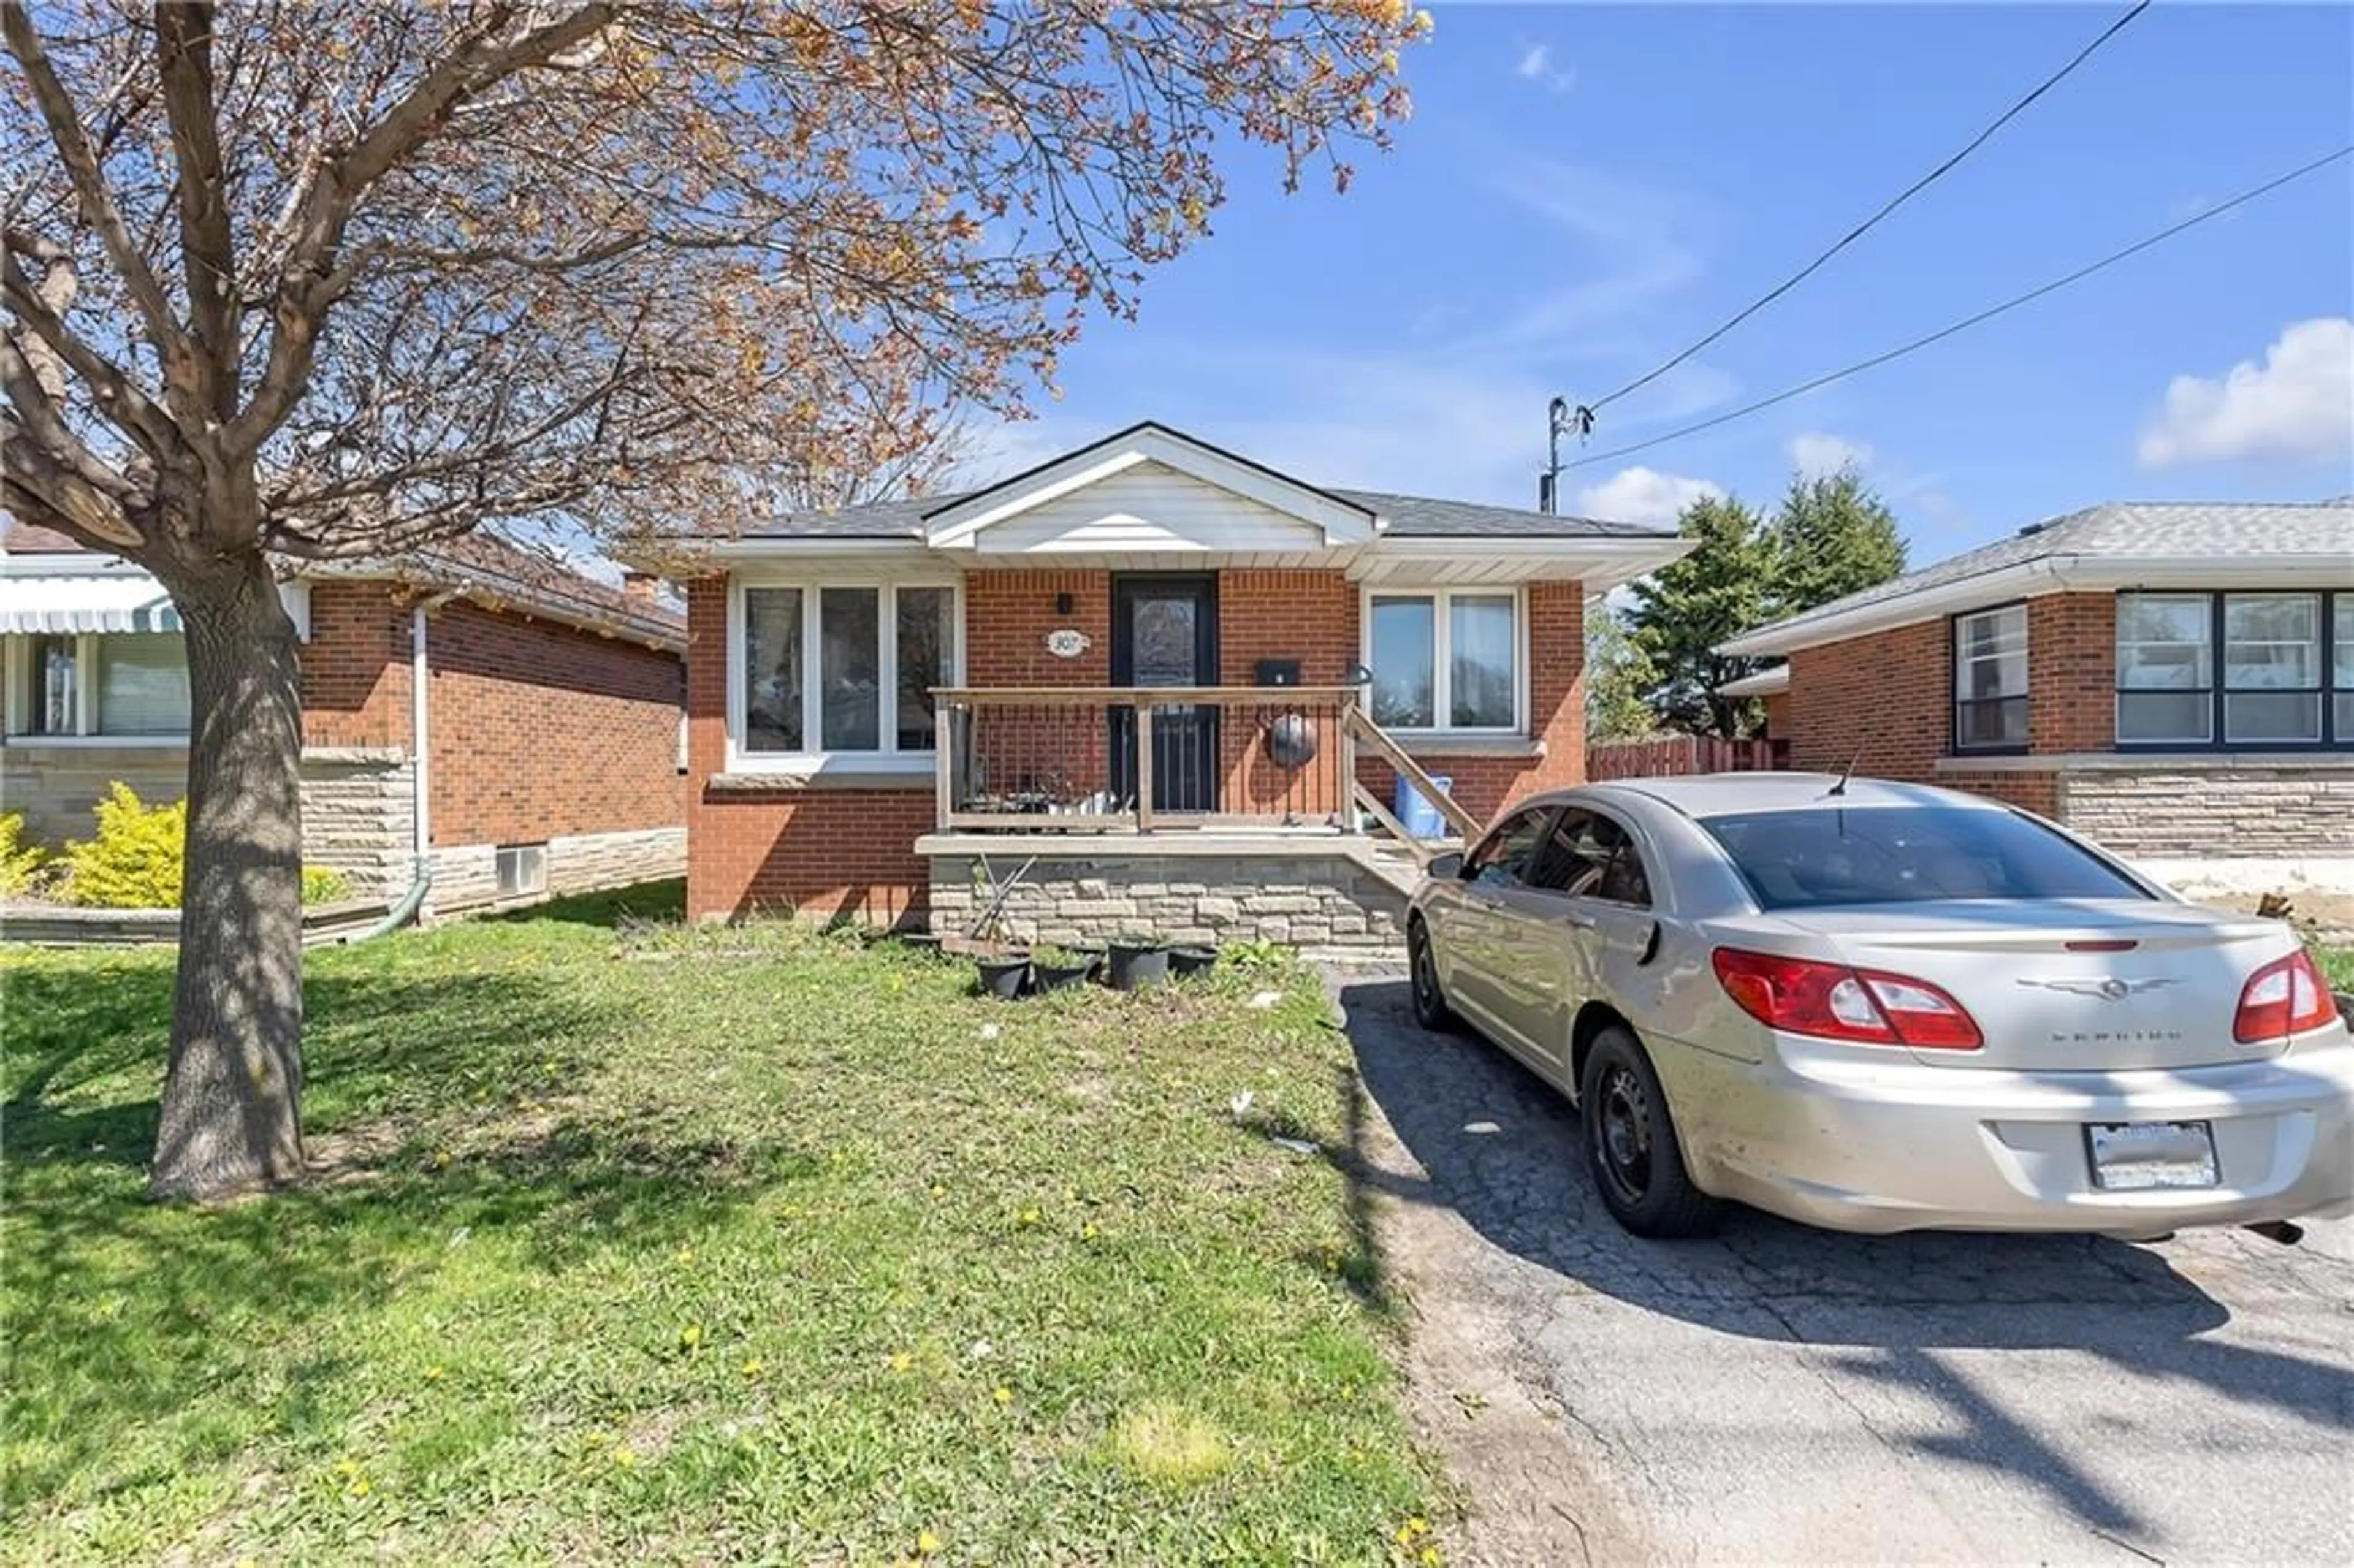 Home with brick exterior material for 307 Mohawk Rd, Hamilton Ontario L9A 2J5